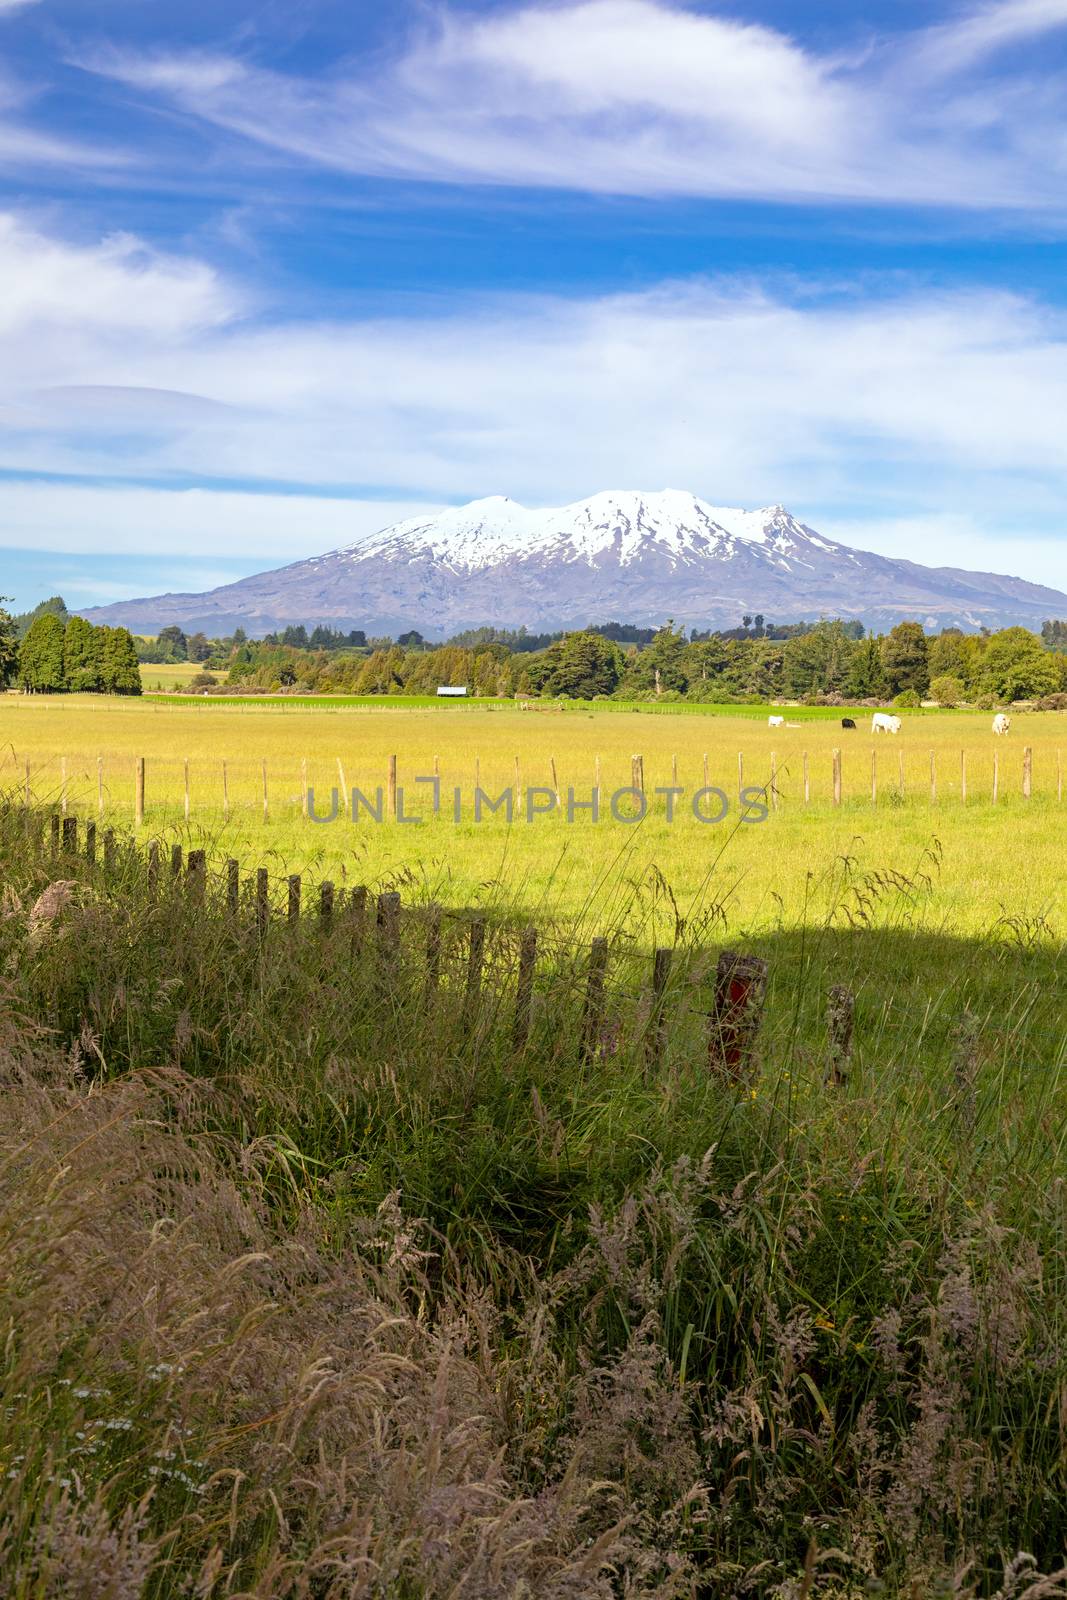 Mount Ruapehu volcano in New Zealand by magann